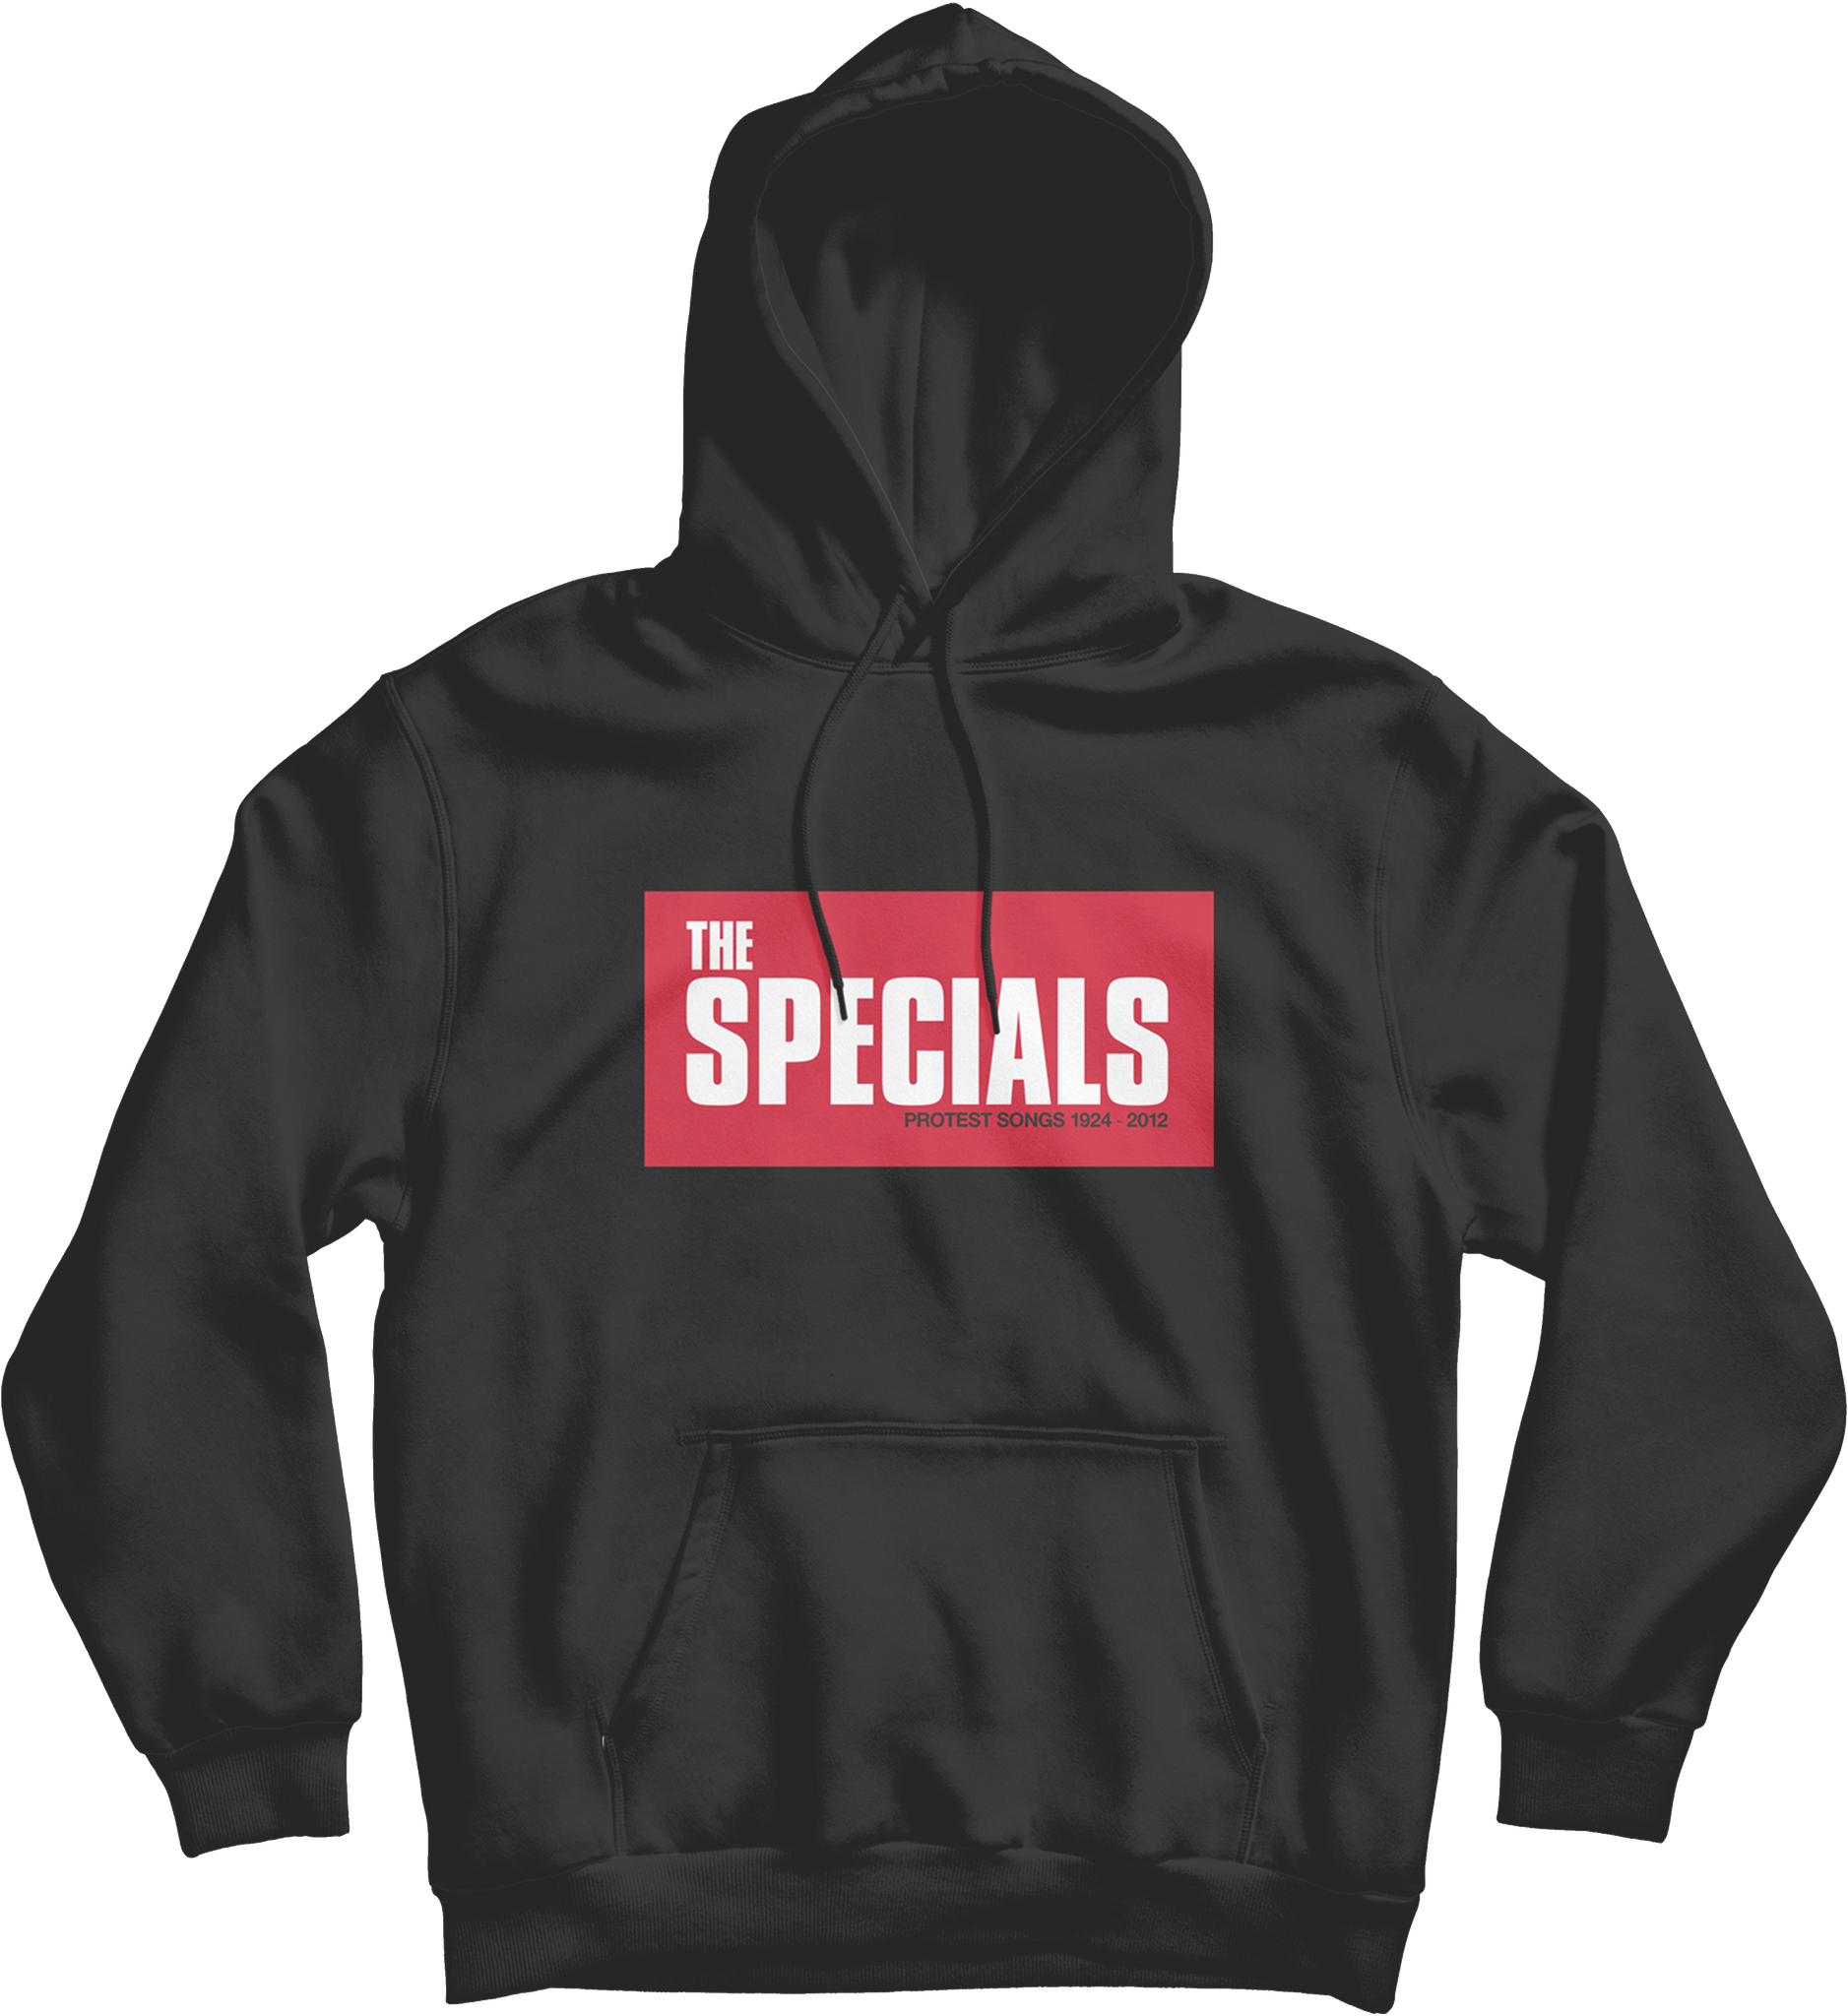 THE SPECIALS - "PROTEST SONGS" HOODED PULLOVER SWEATSHIRT